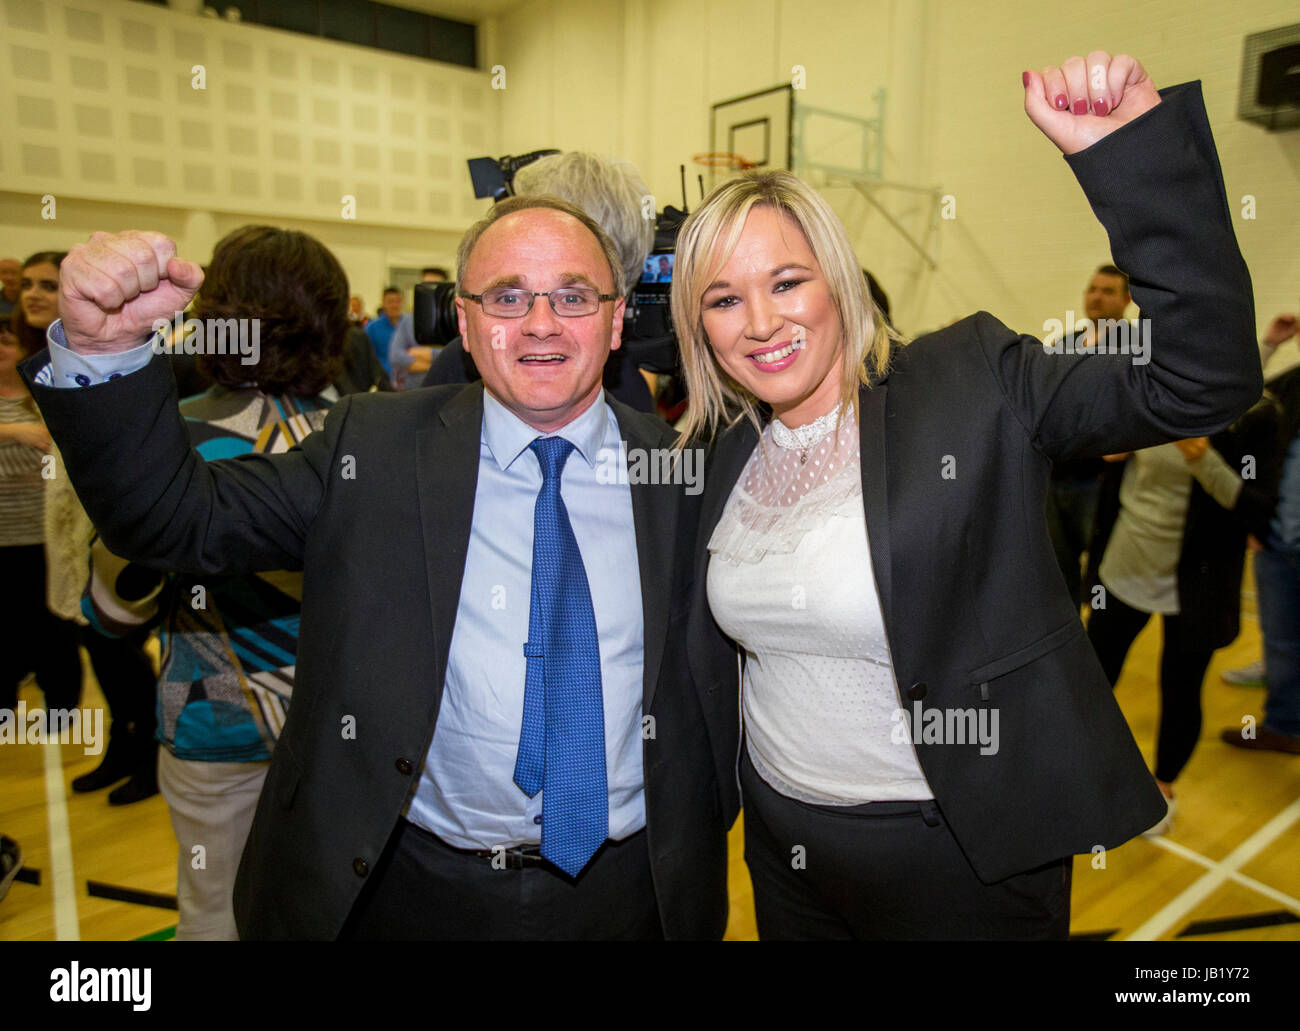 Newly elected Sinn Fein MP for West Tyrone Barry McElduff MP (left) with Sinn Fein leader in Northern Ireland Michelle O'Neill, at the Omagh Leisure Complex, Co Tyrone. Stock Photo